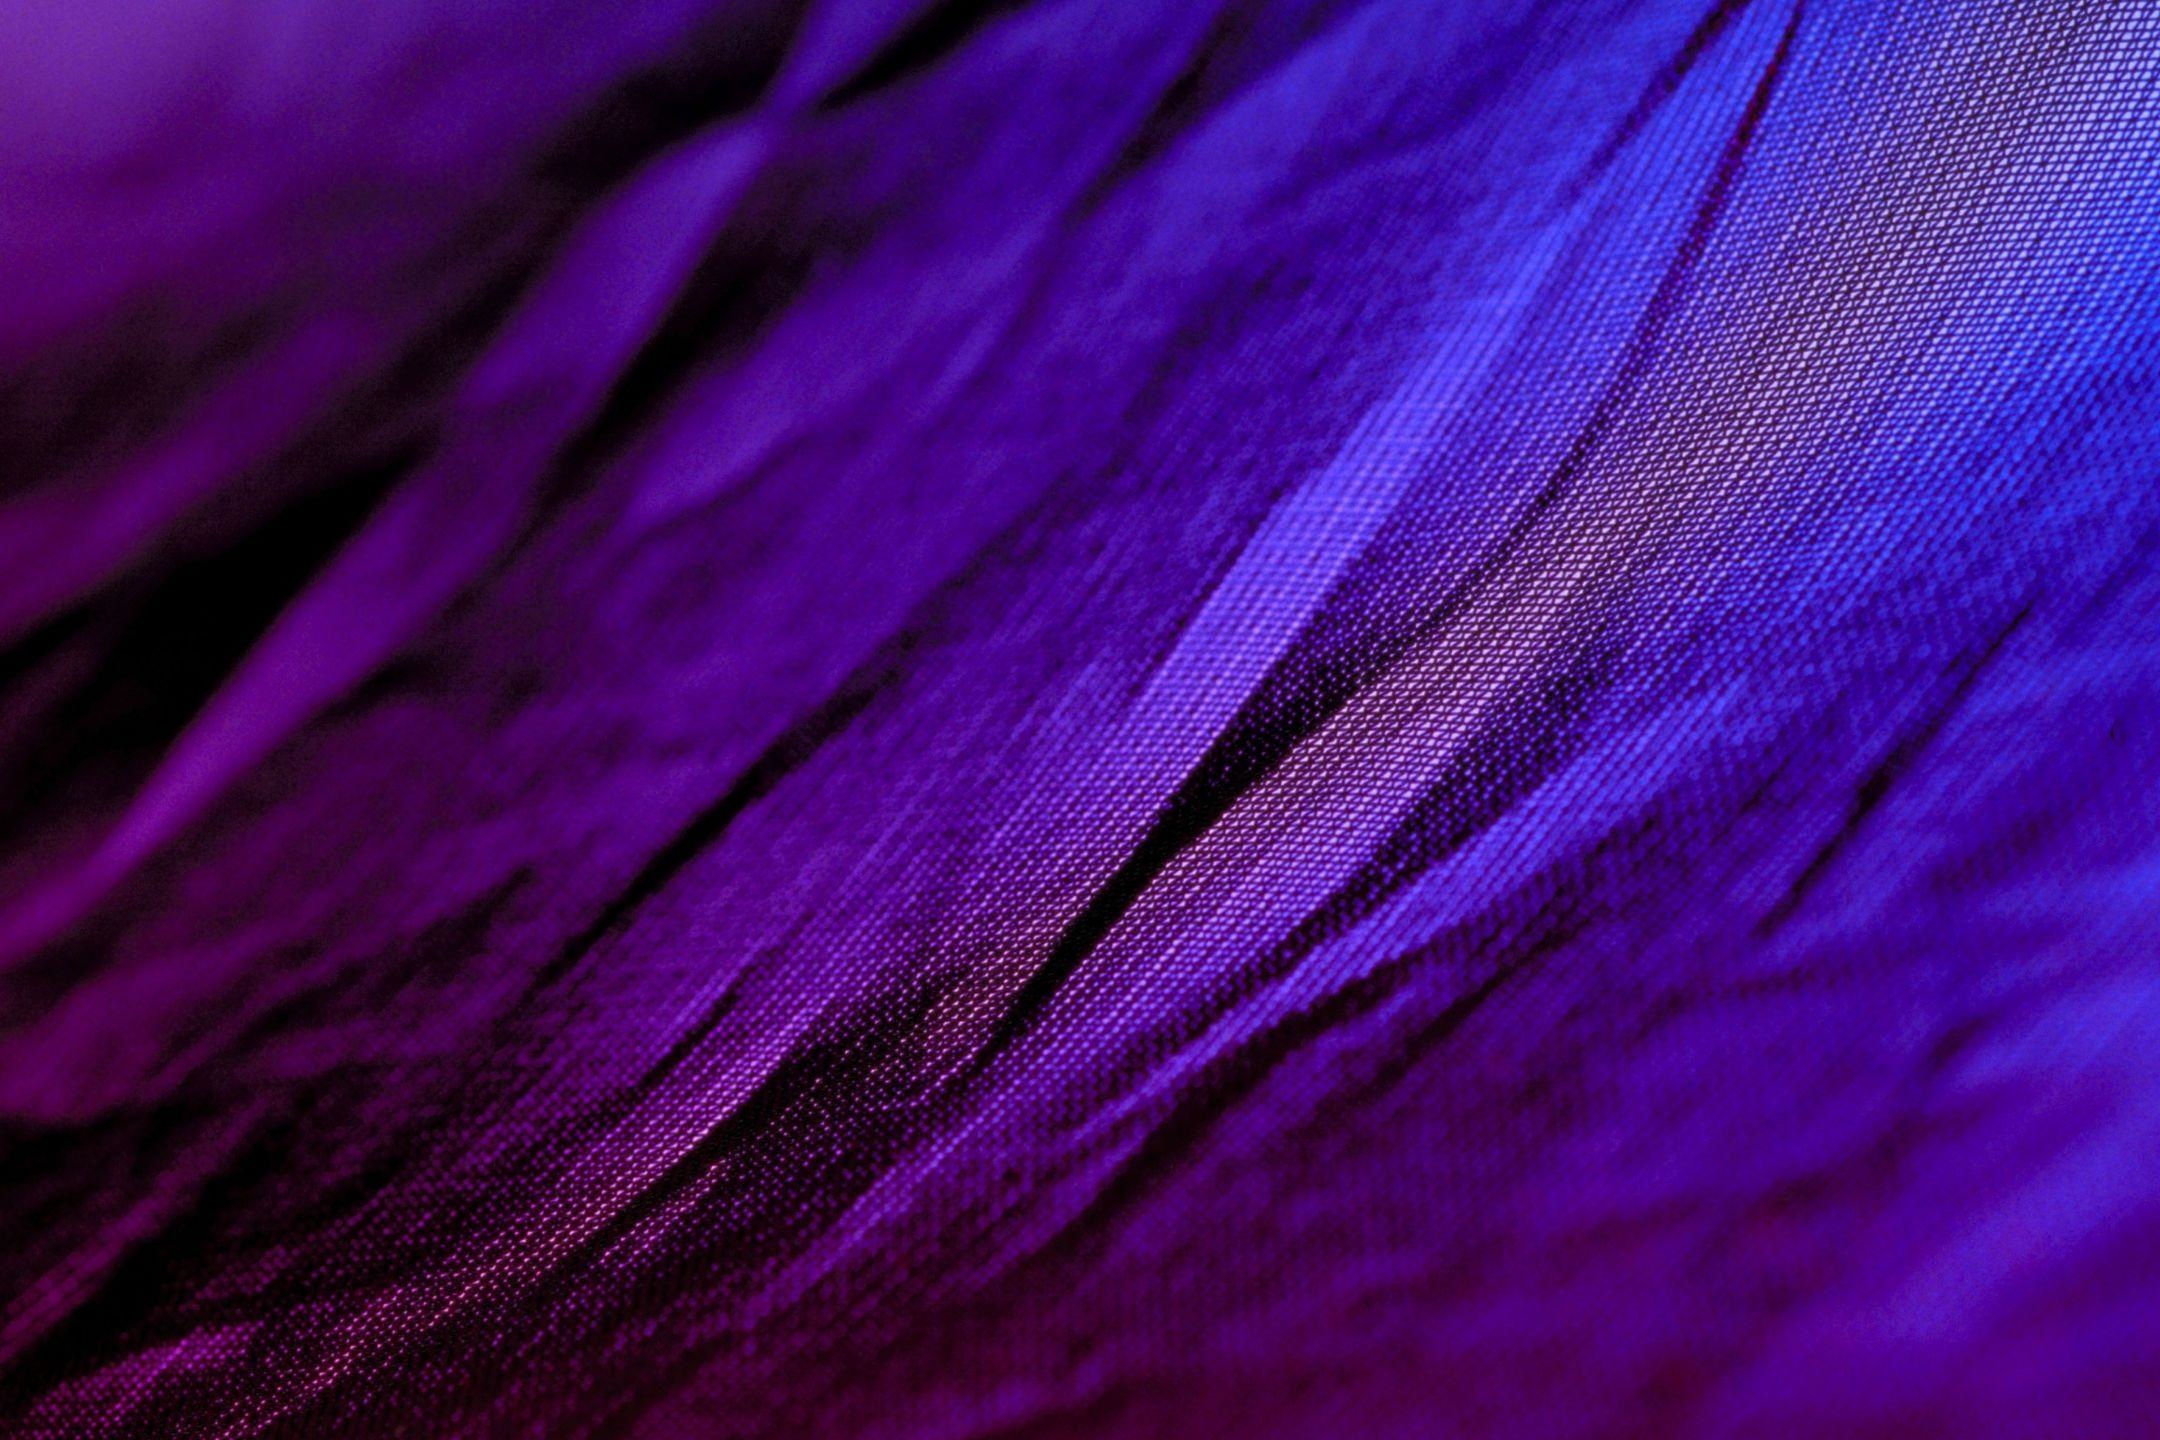 Free Download Images Surface Pro 3 Wallpaper Page 5 2160x1440 For Your Desktop Mobile Tablet Explore 43 Surface Pro 4 Wallpaper Microsoft Surface Wallpaper Surface Pro 3 Wallpaper Surface 4 Wallpaper